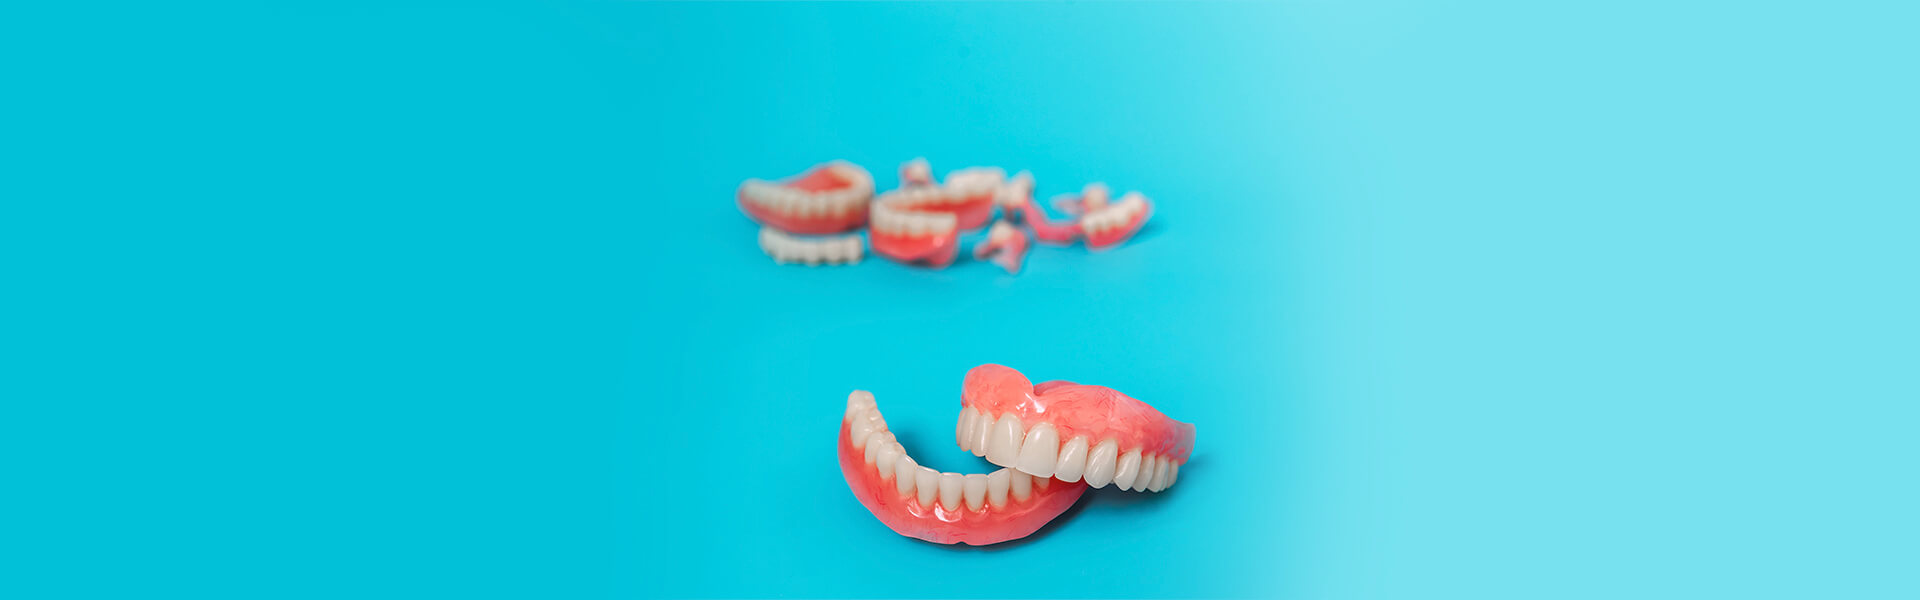 How Should We Care For Our Mouth and Gums if We Have Dentures?